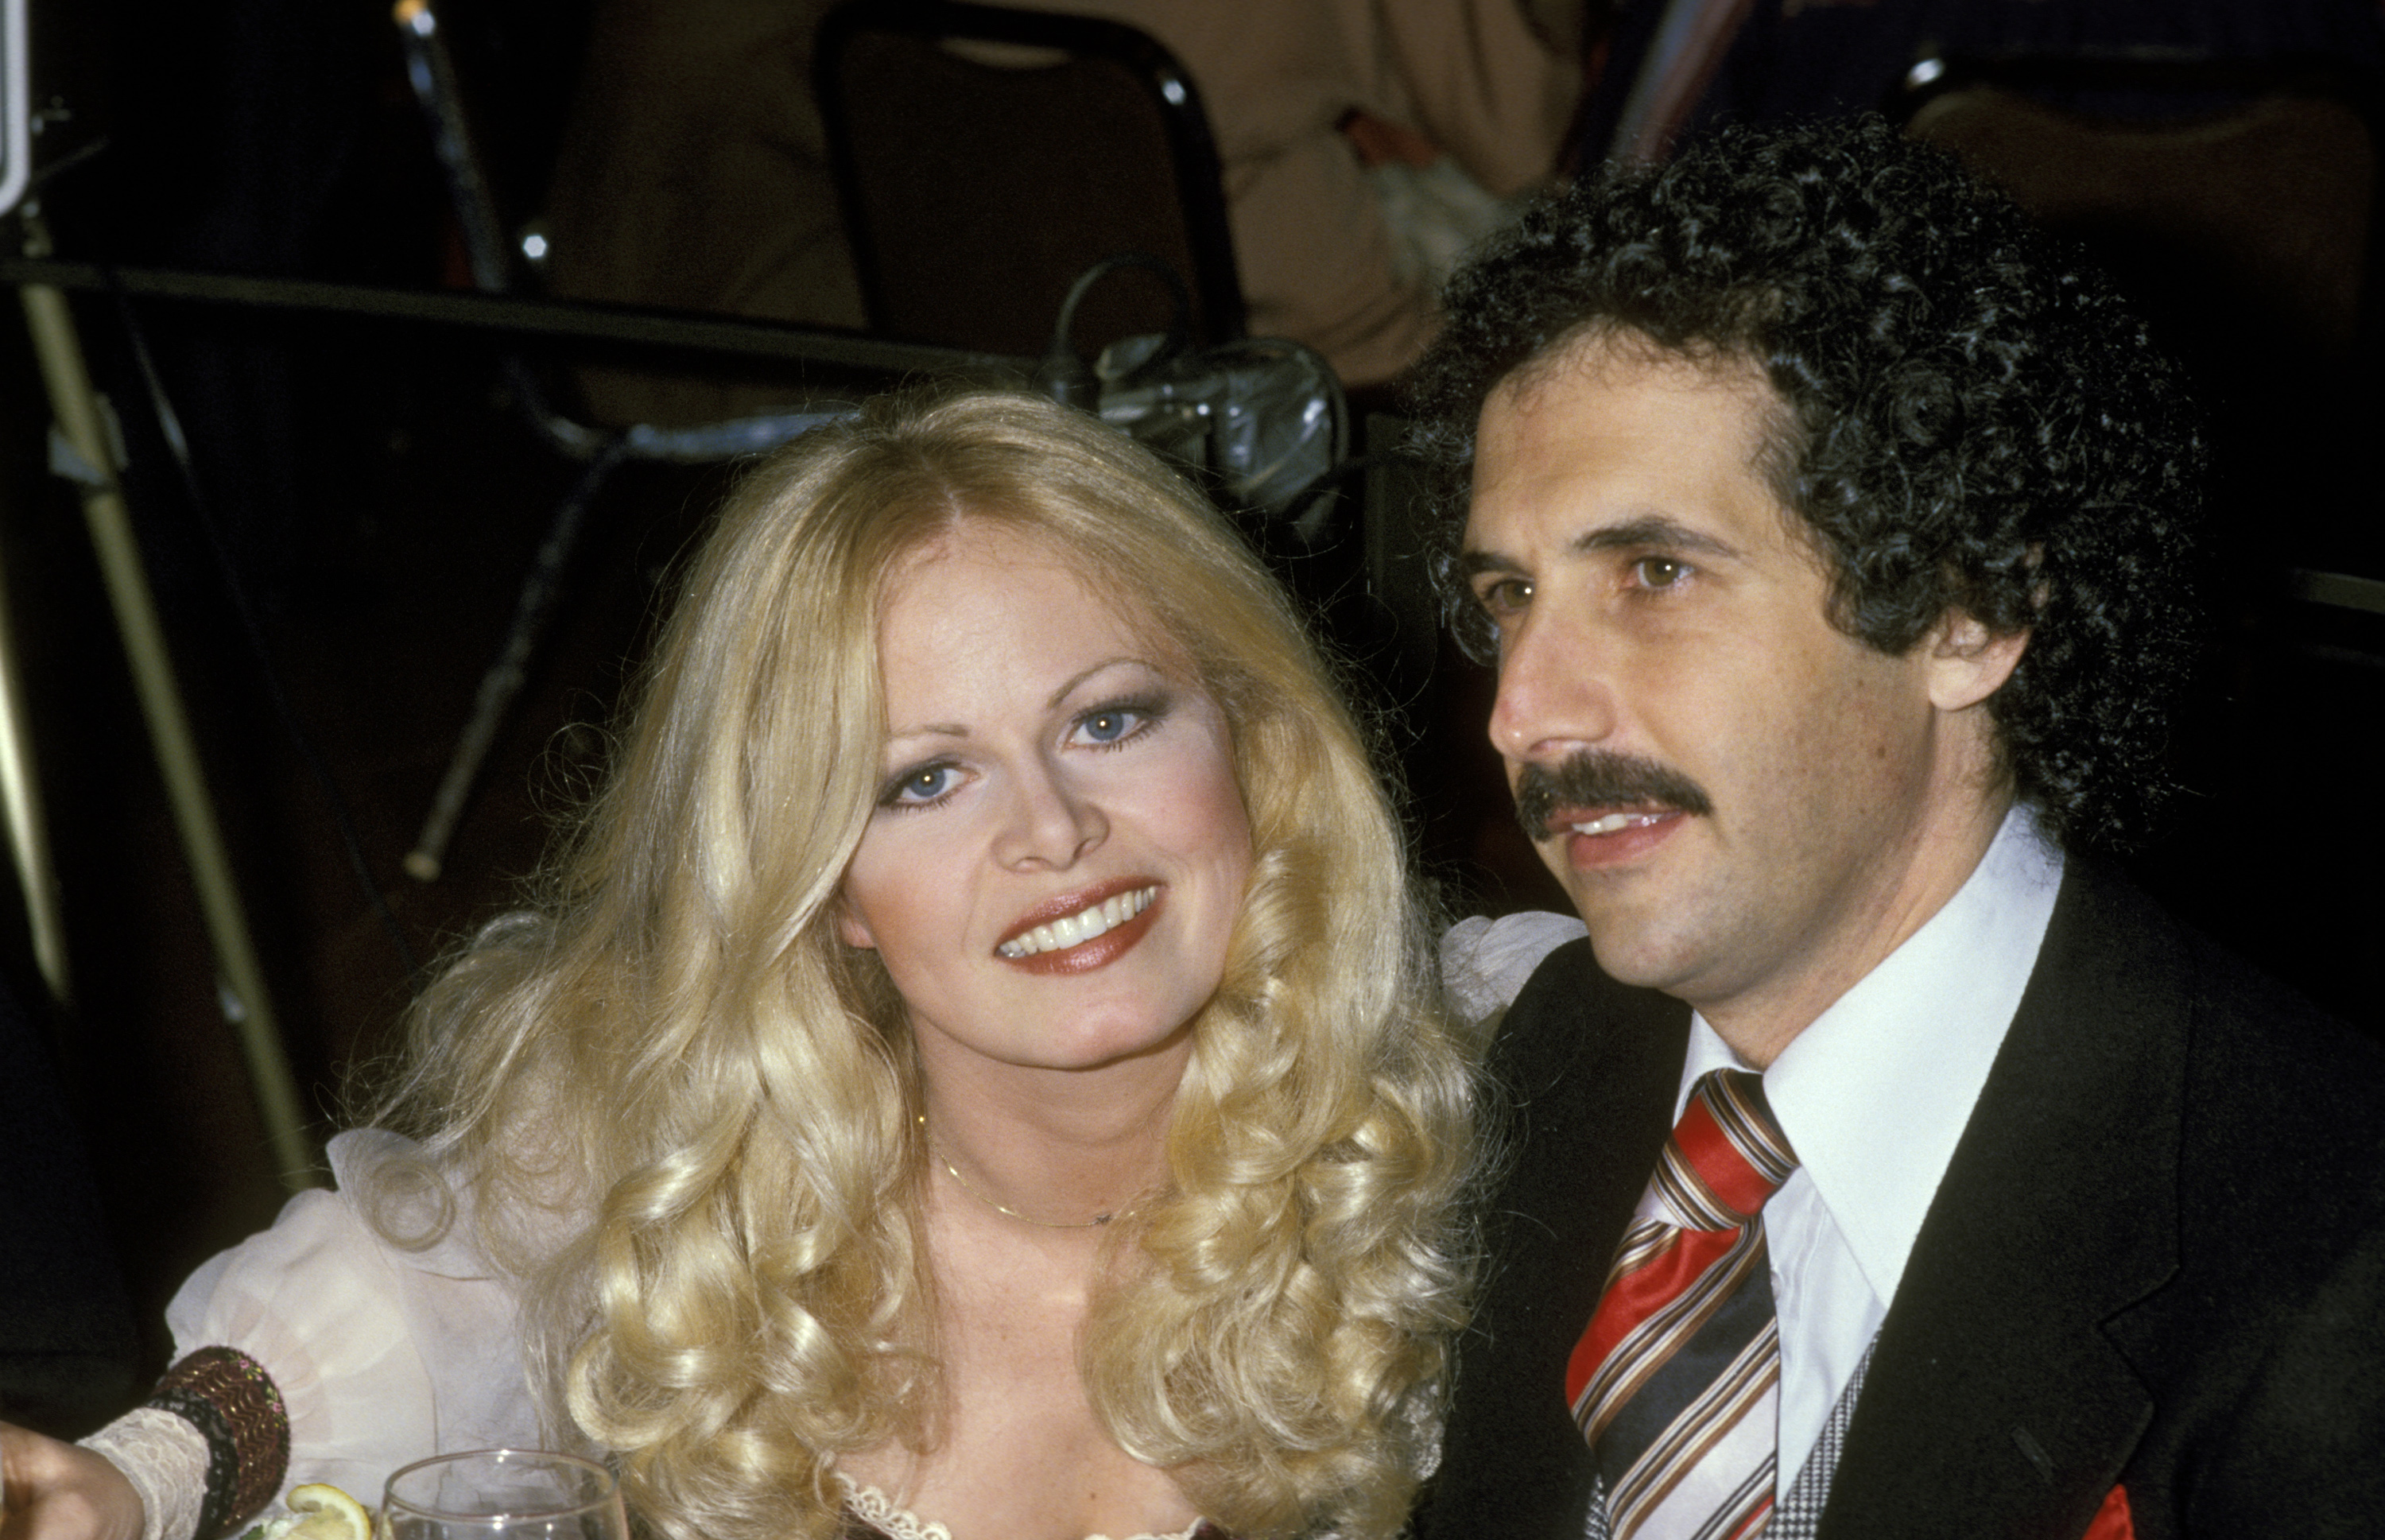 Sally Struthers and William Rader during Iris Awards Banquet on March 4, 1978 at Bonaventure Hotel in Los Angeles, California. | Source: Getty Images